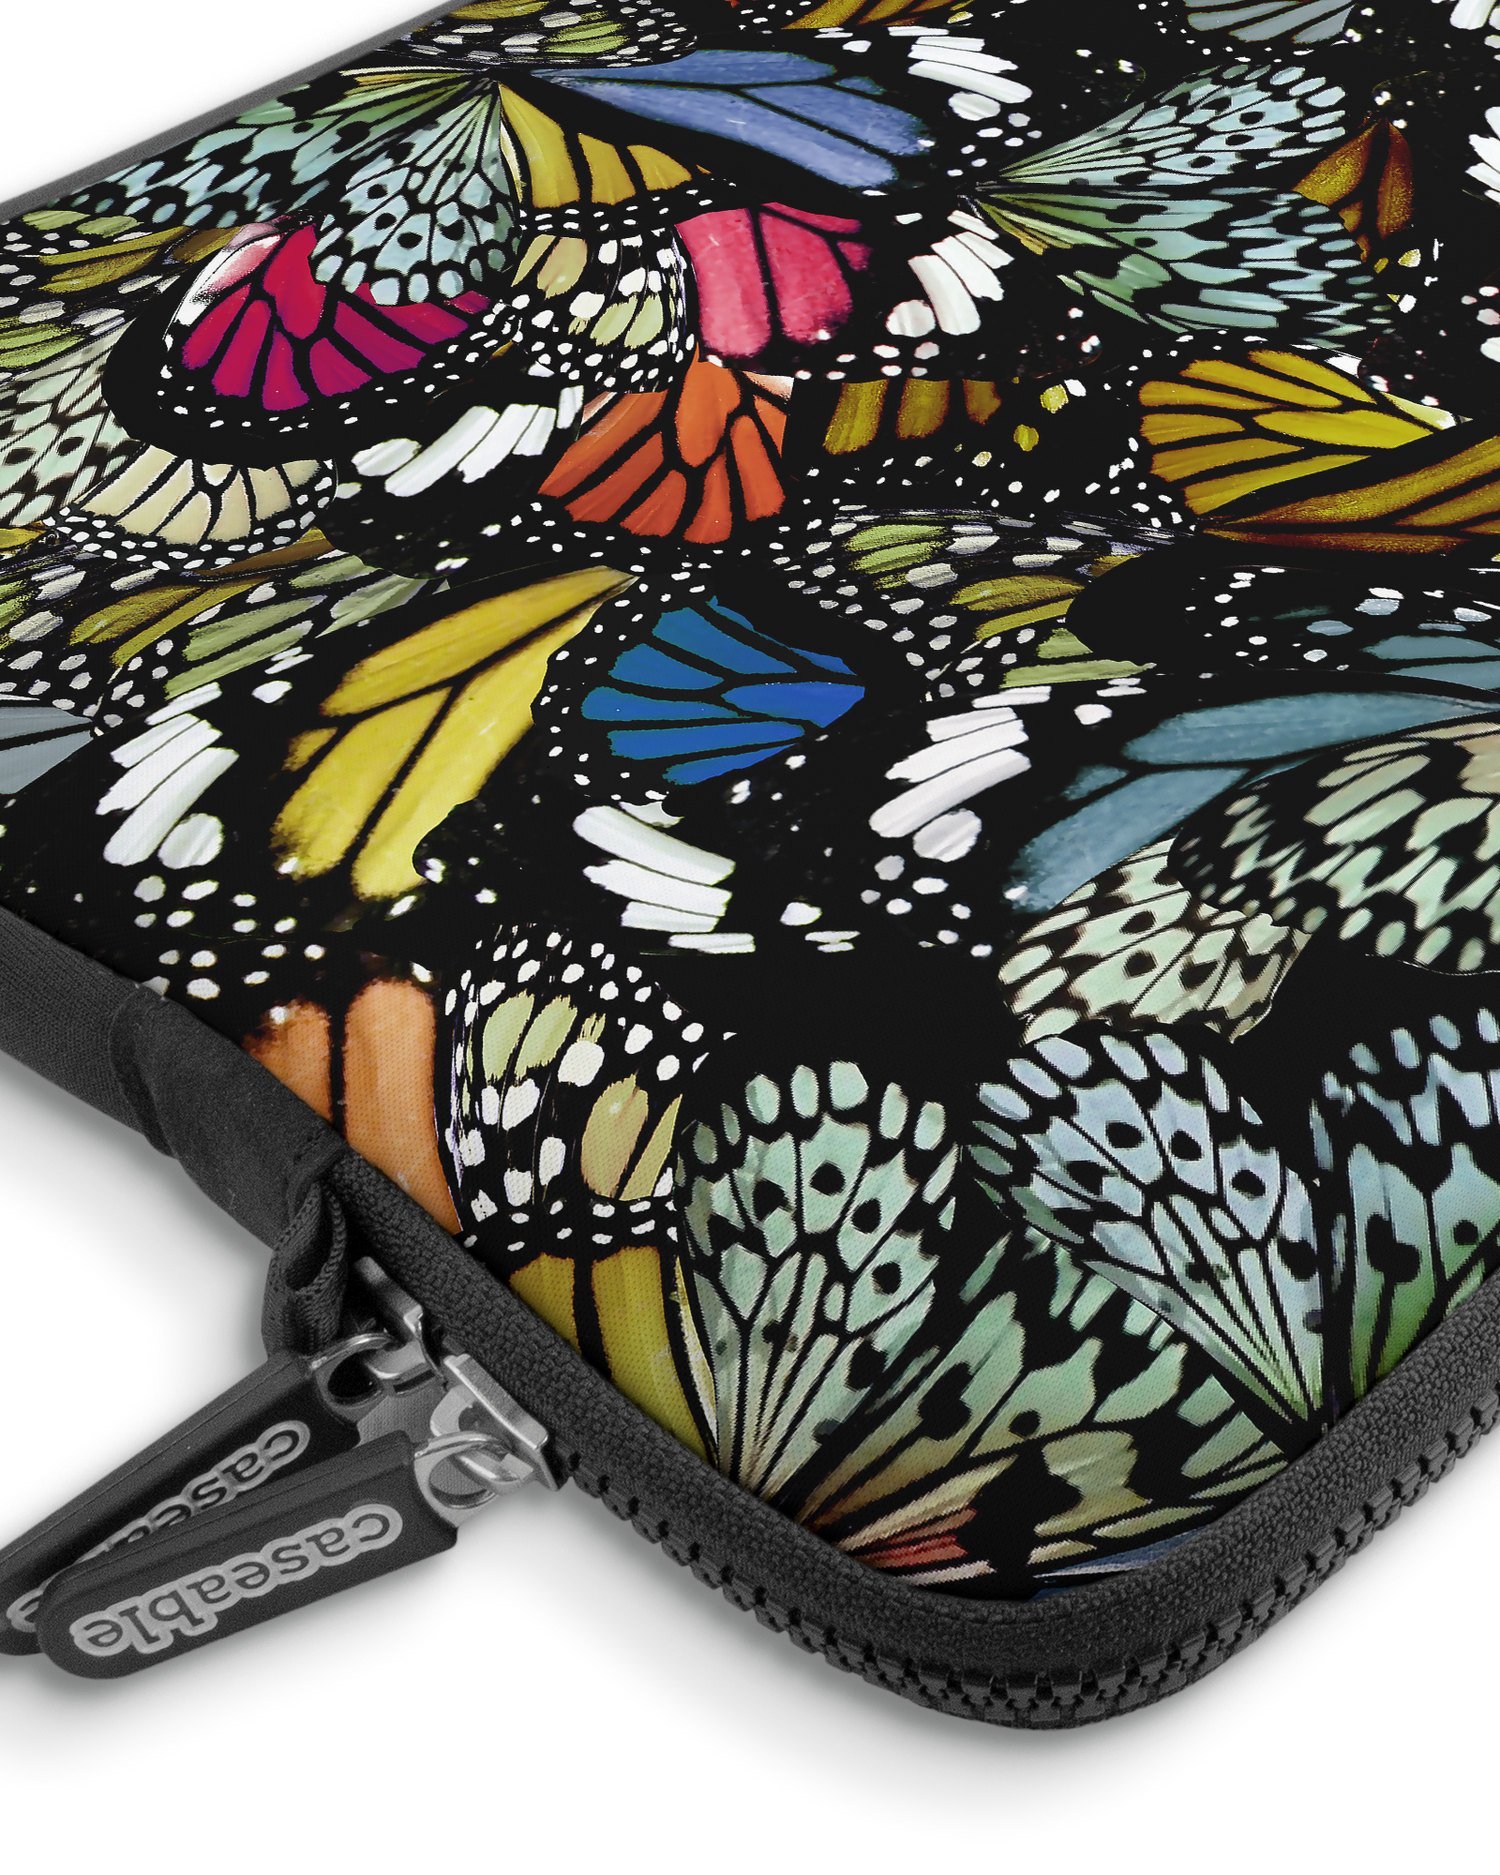 Psychedelic Butterflies Premium Laptop Bag 13-14 inch with device inside